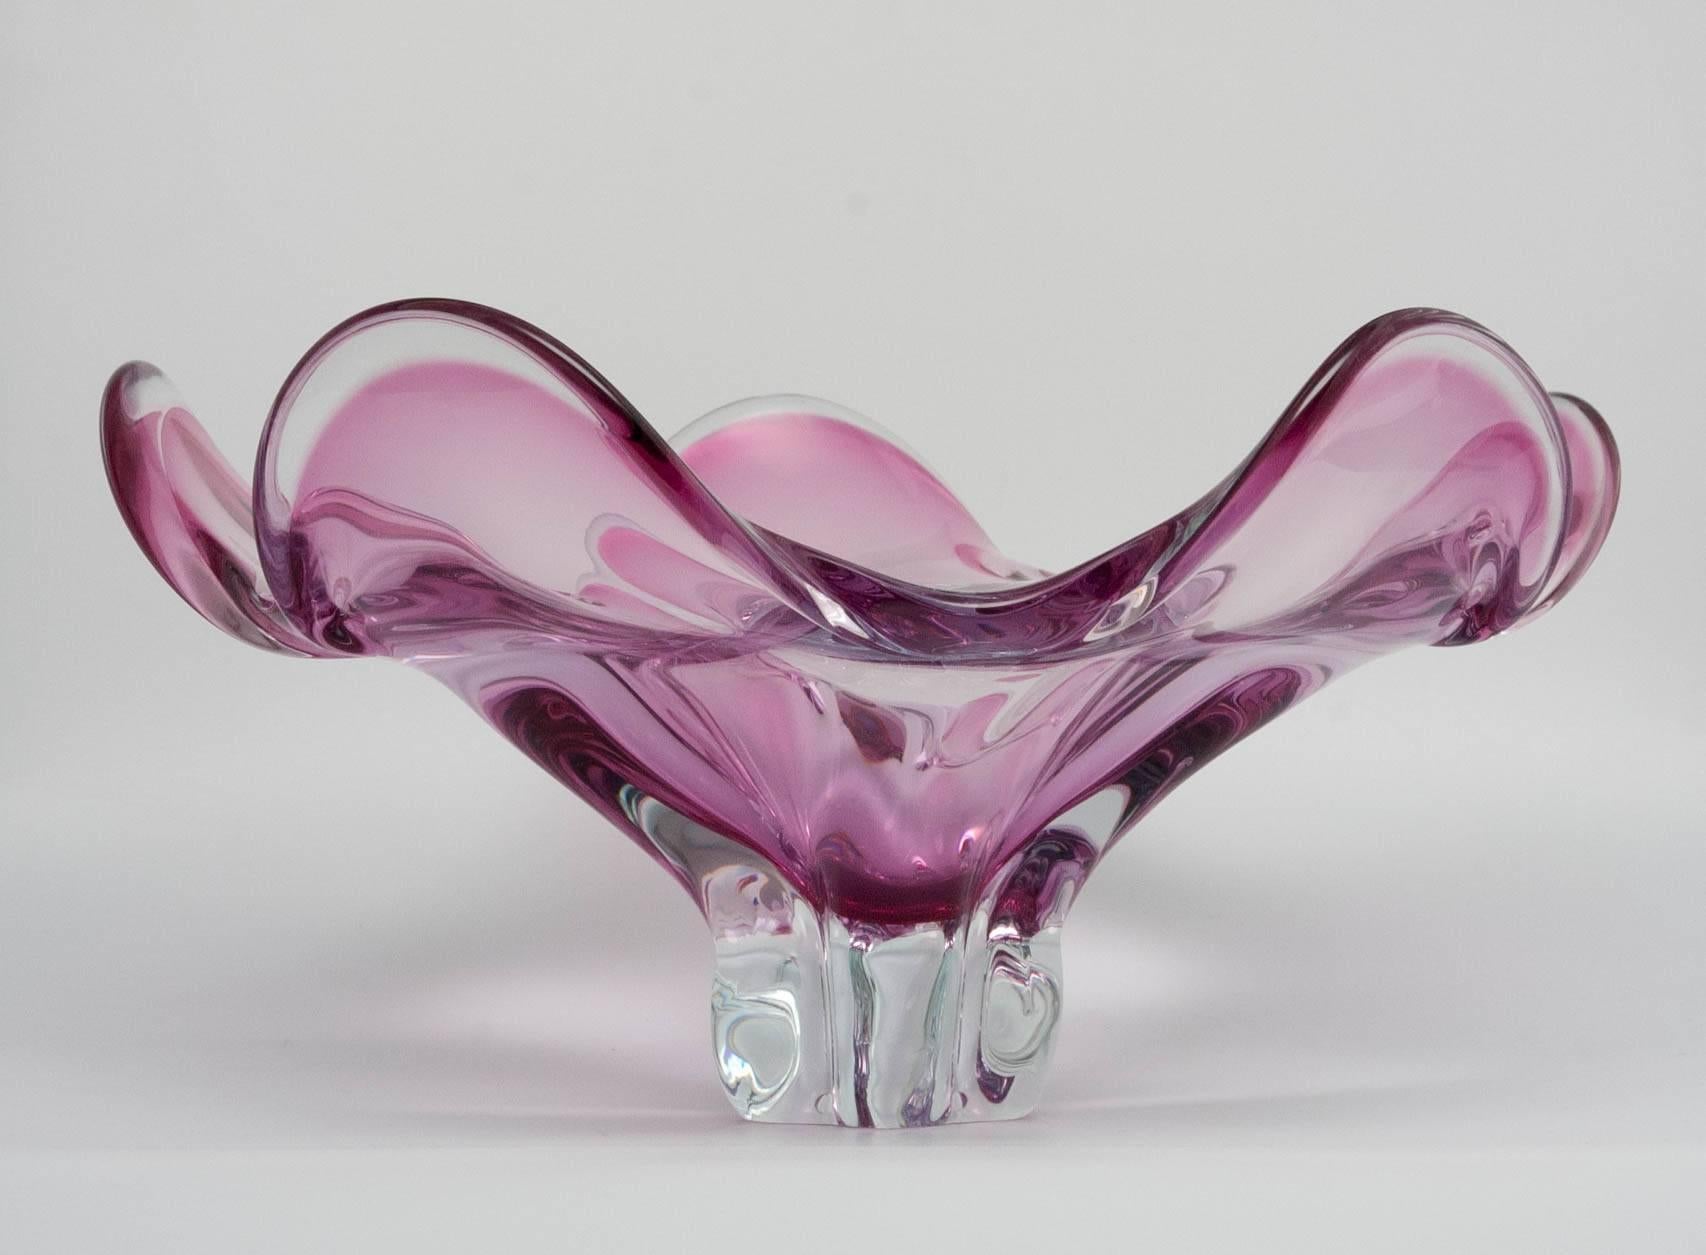 Generously sized Murano glass fruit bowl. Wonderfully clear and vibrant bowl in a floral shape from the 1960s.

